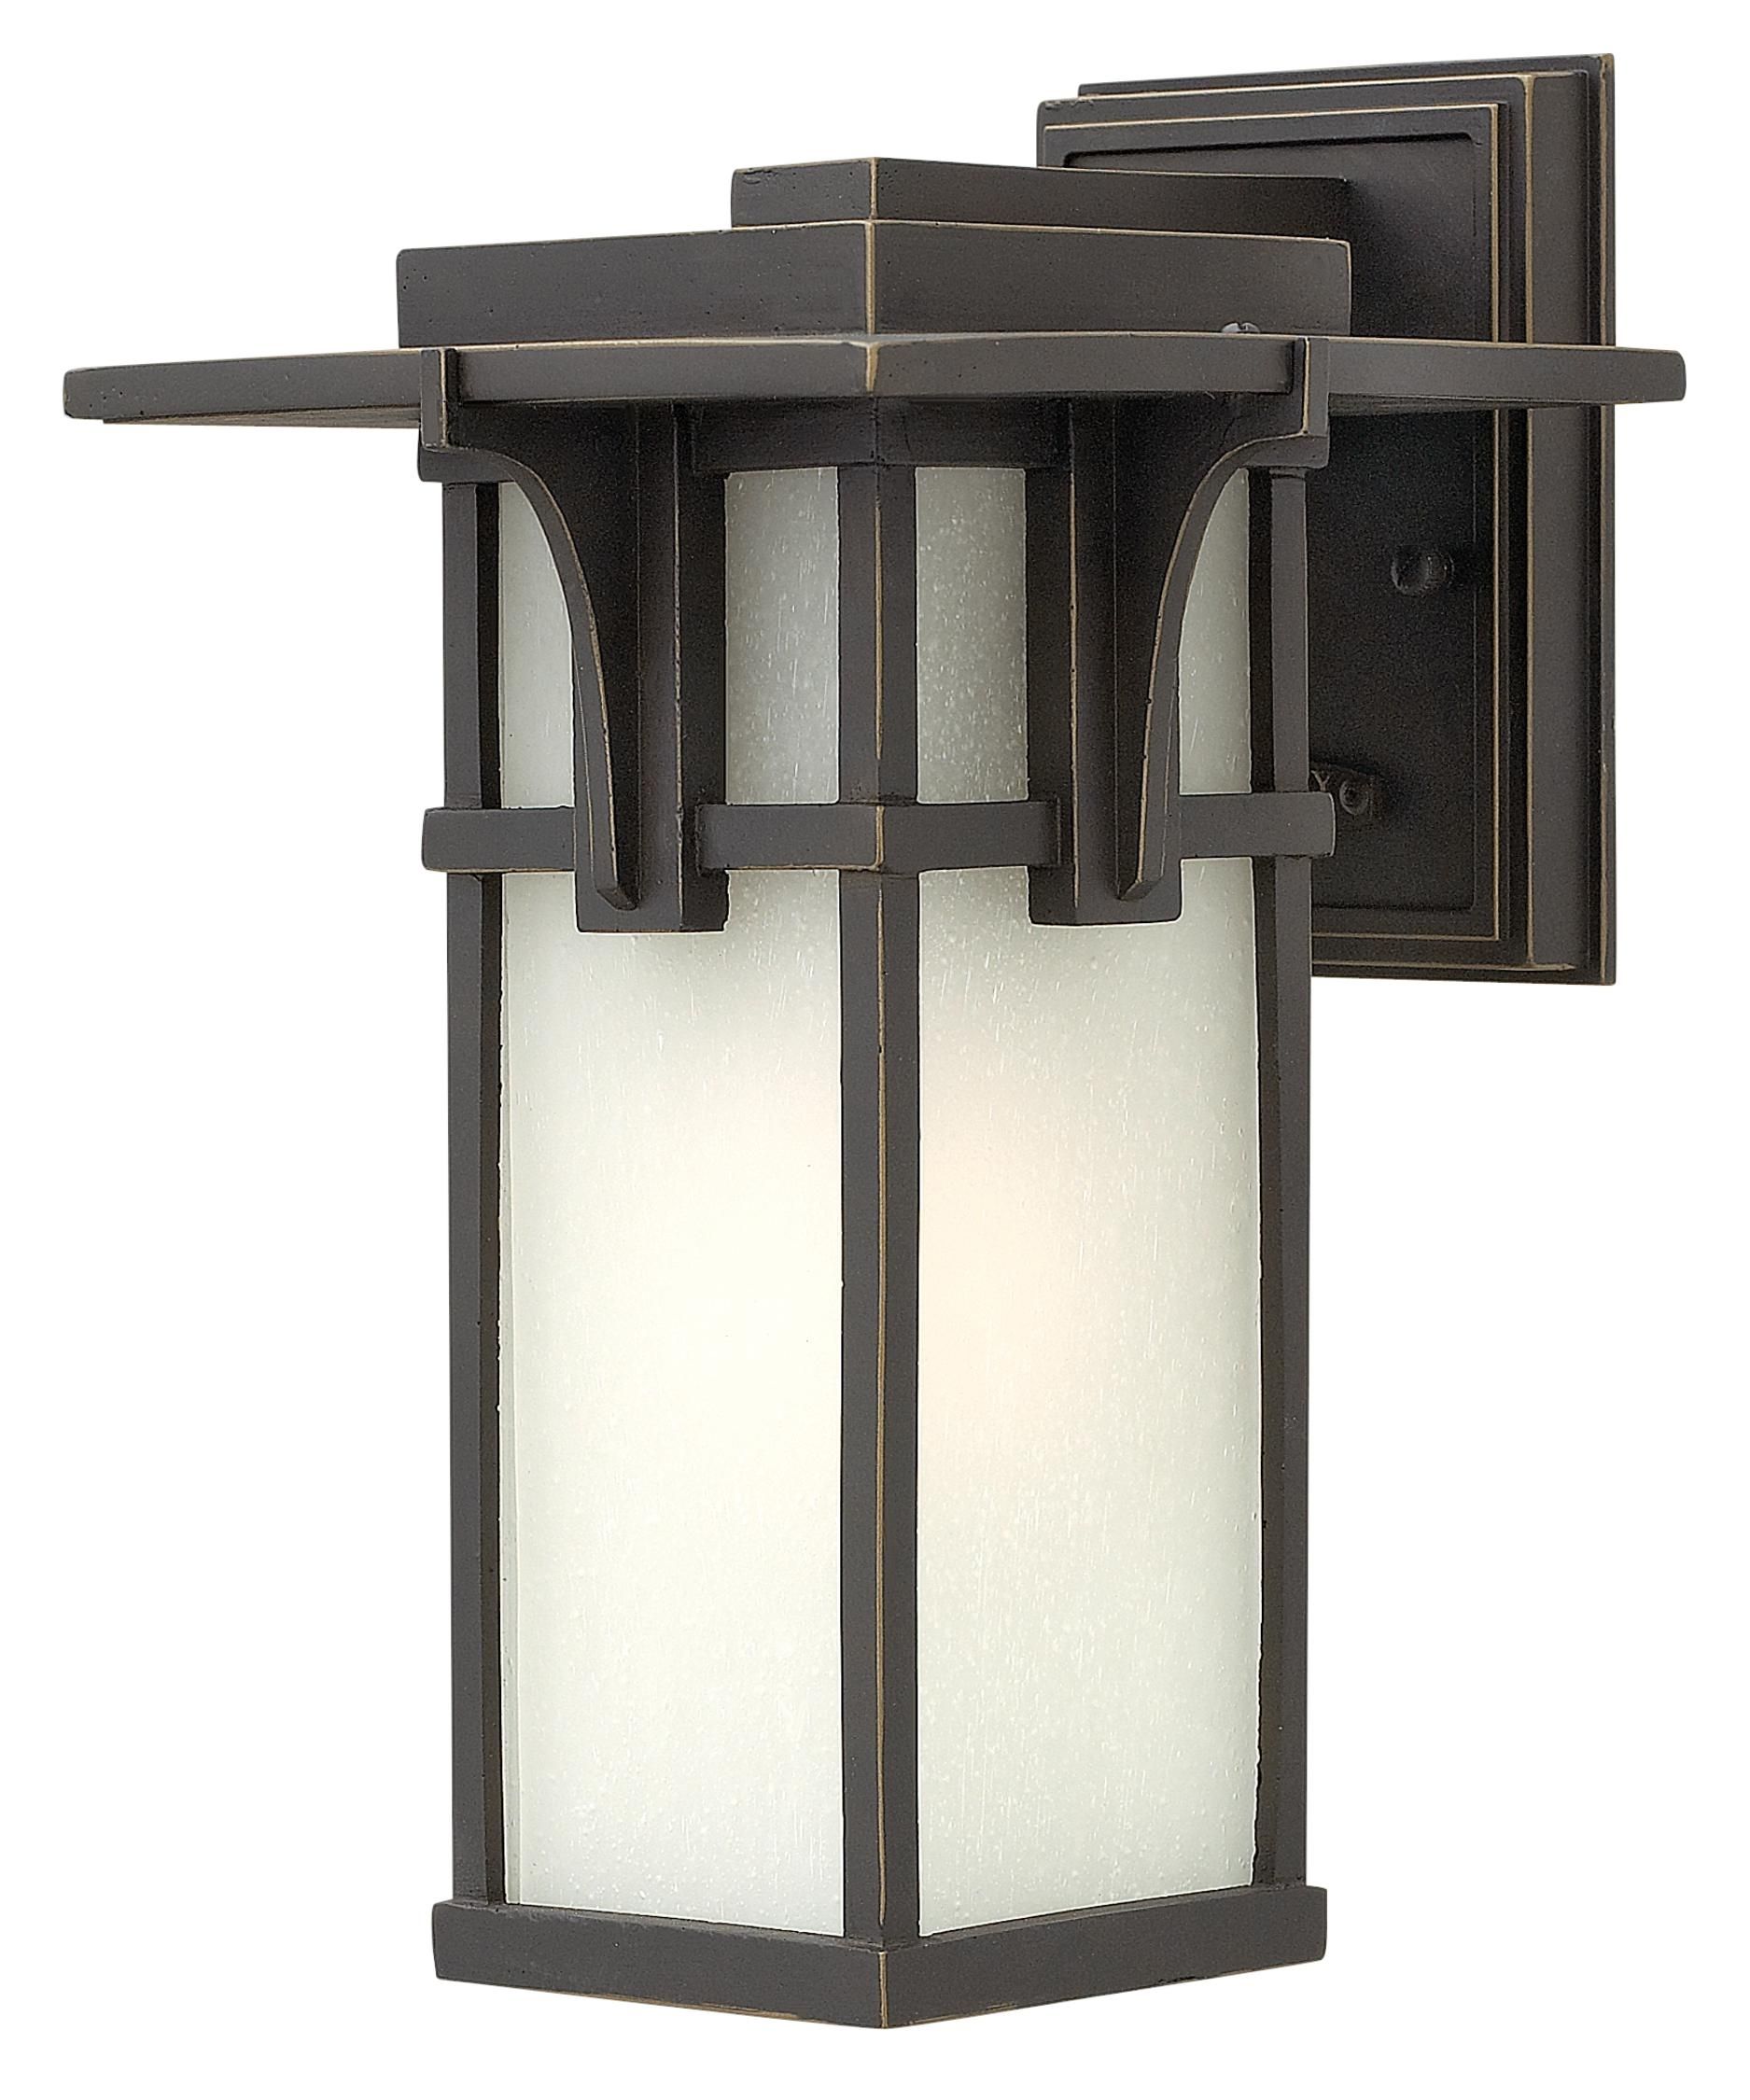 Hinkley Lighting Manhattan Inch Wide Light Outdoor Wall Ideas Large In Hinkley Lighting For Home Garden (View 5 of 15)